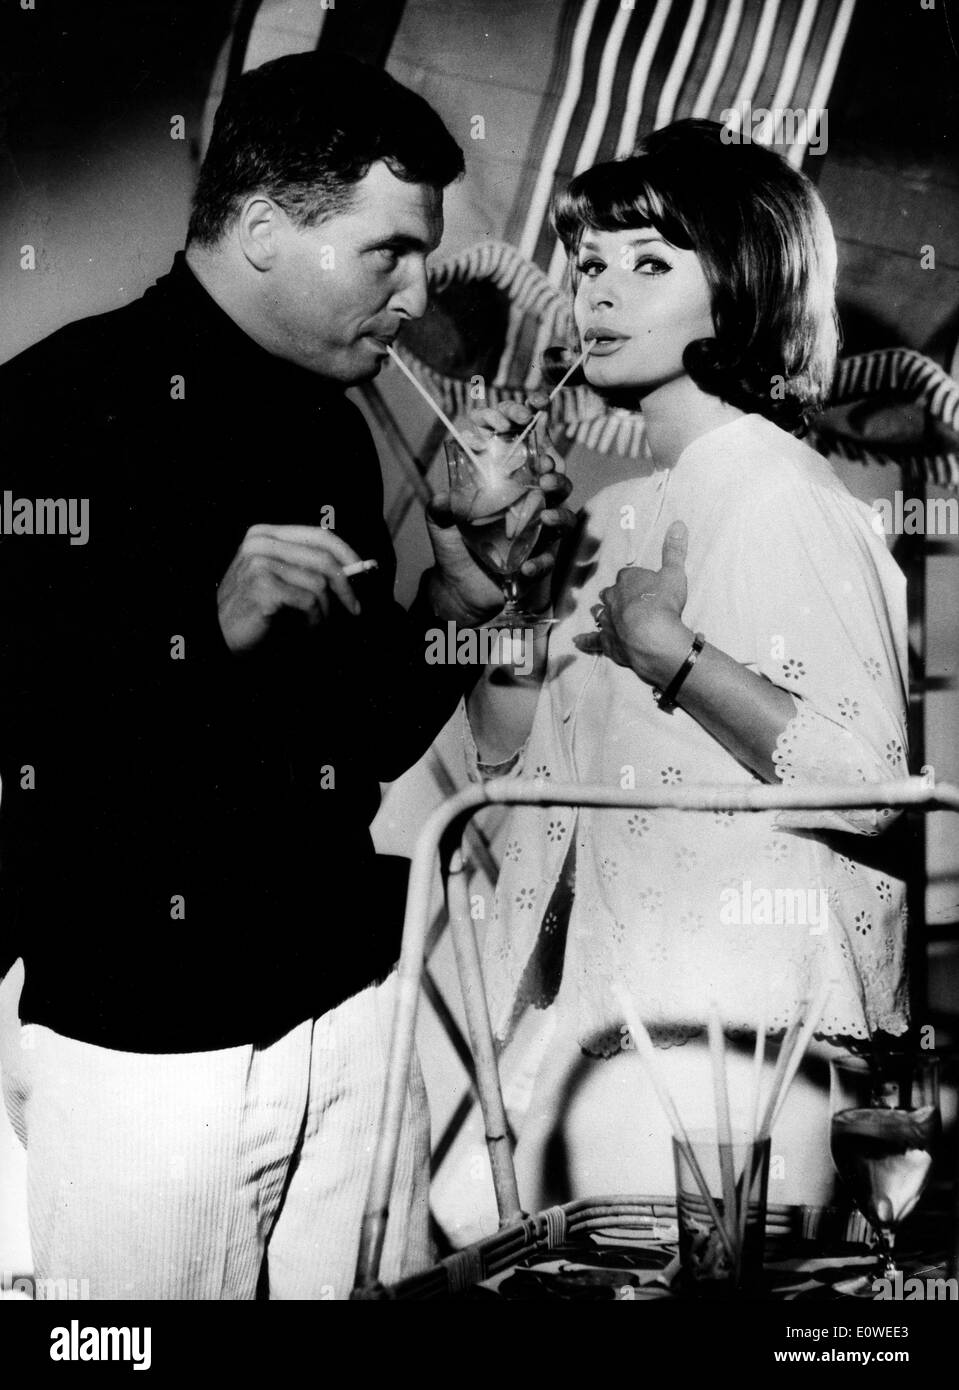 Actress Senta Berger and co-star Helmut Schmid having a drink on set Stock Photo